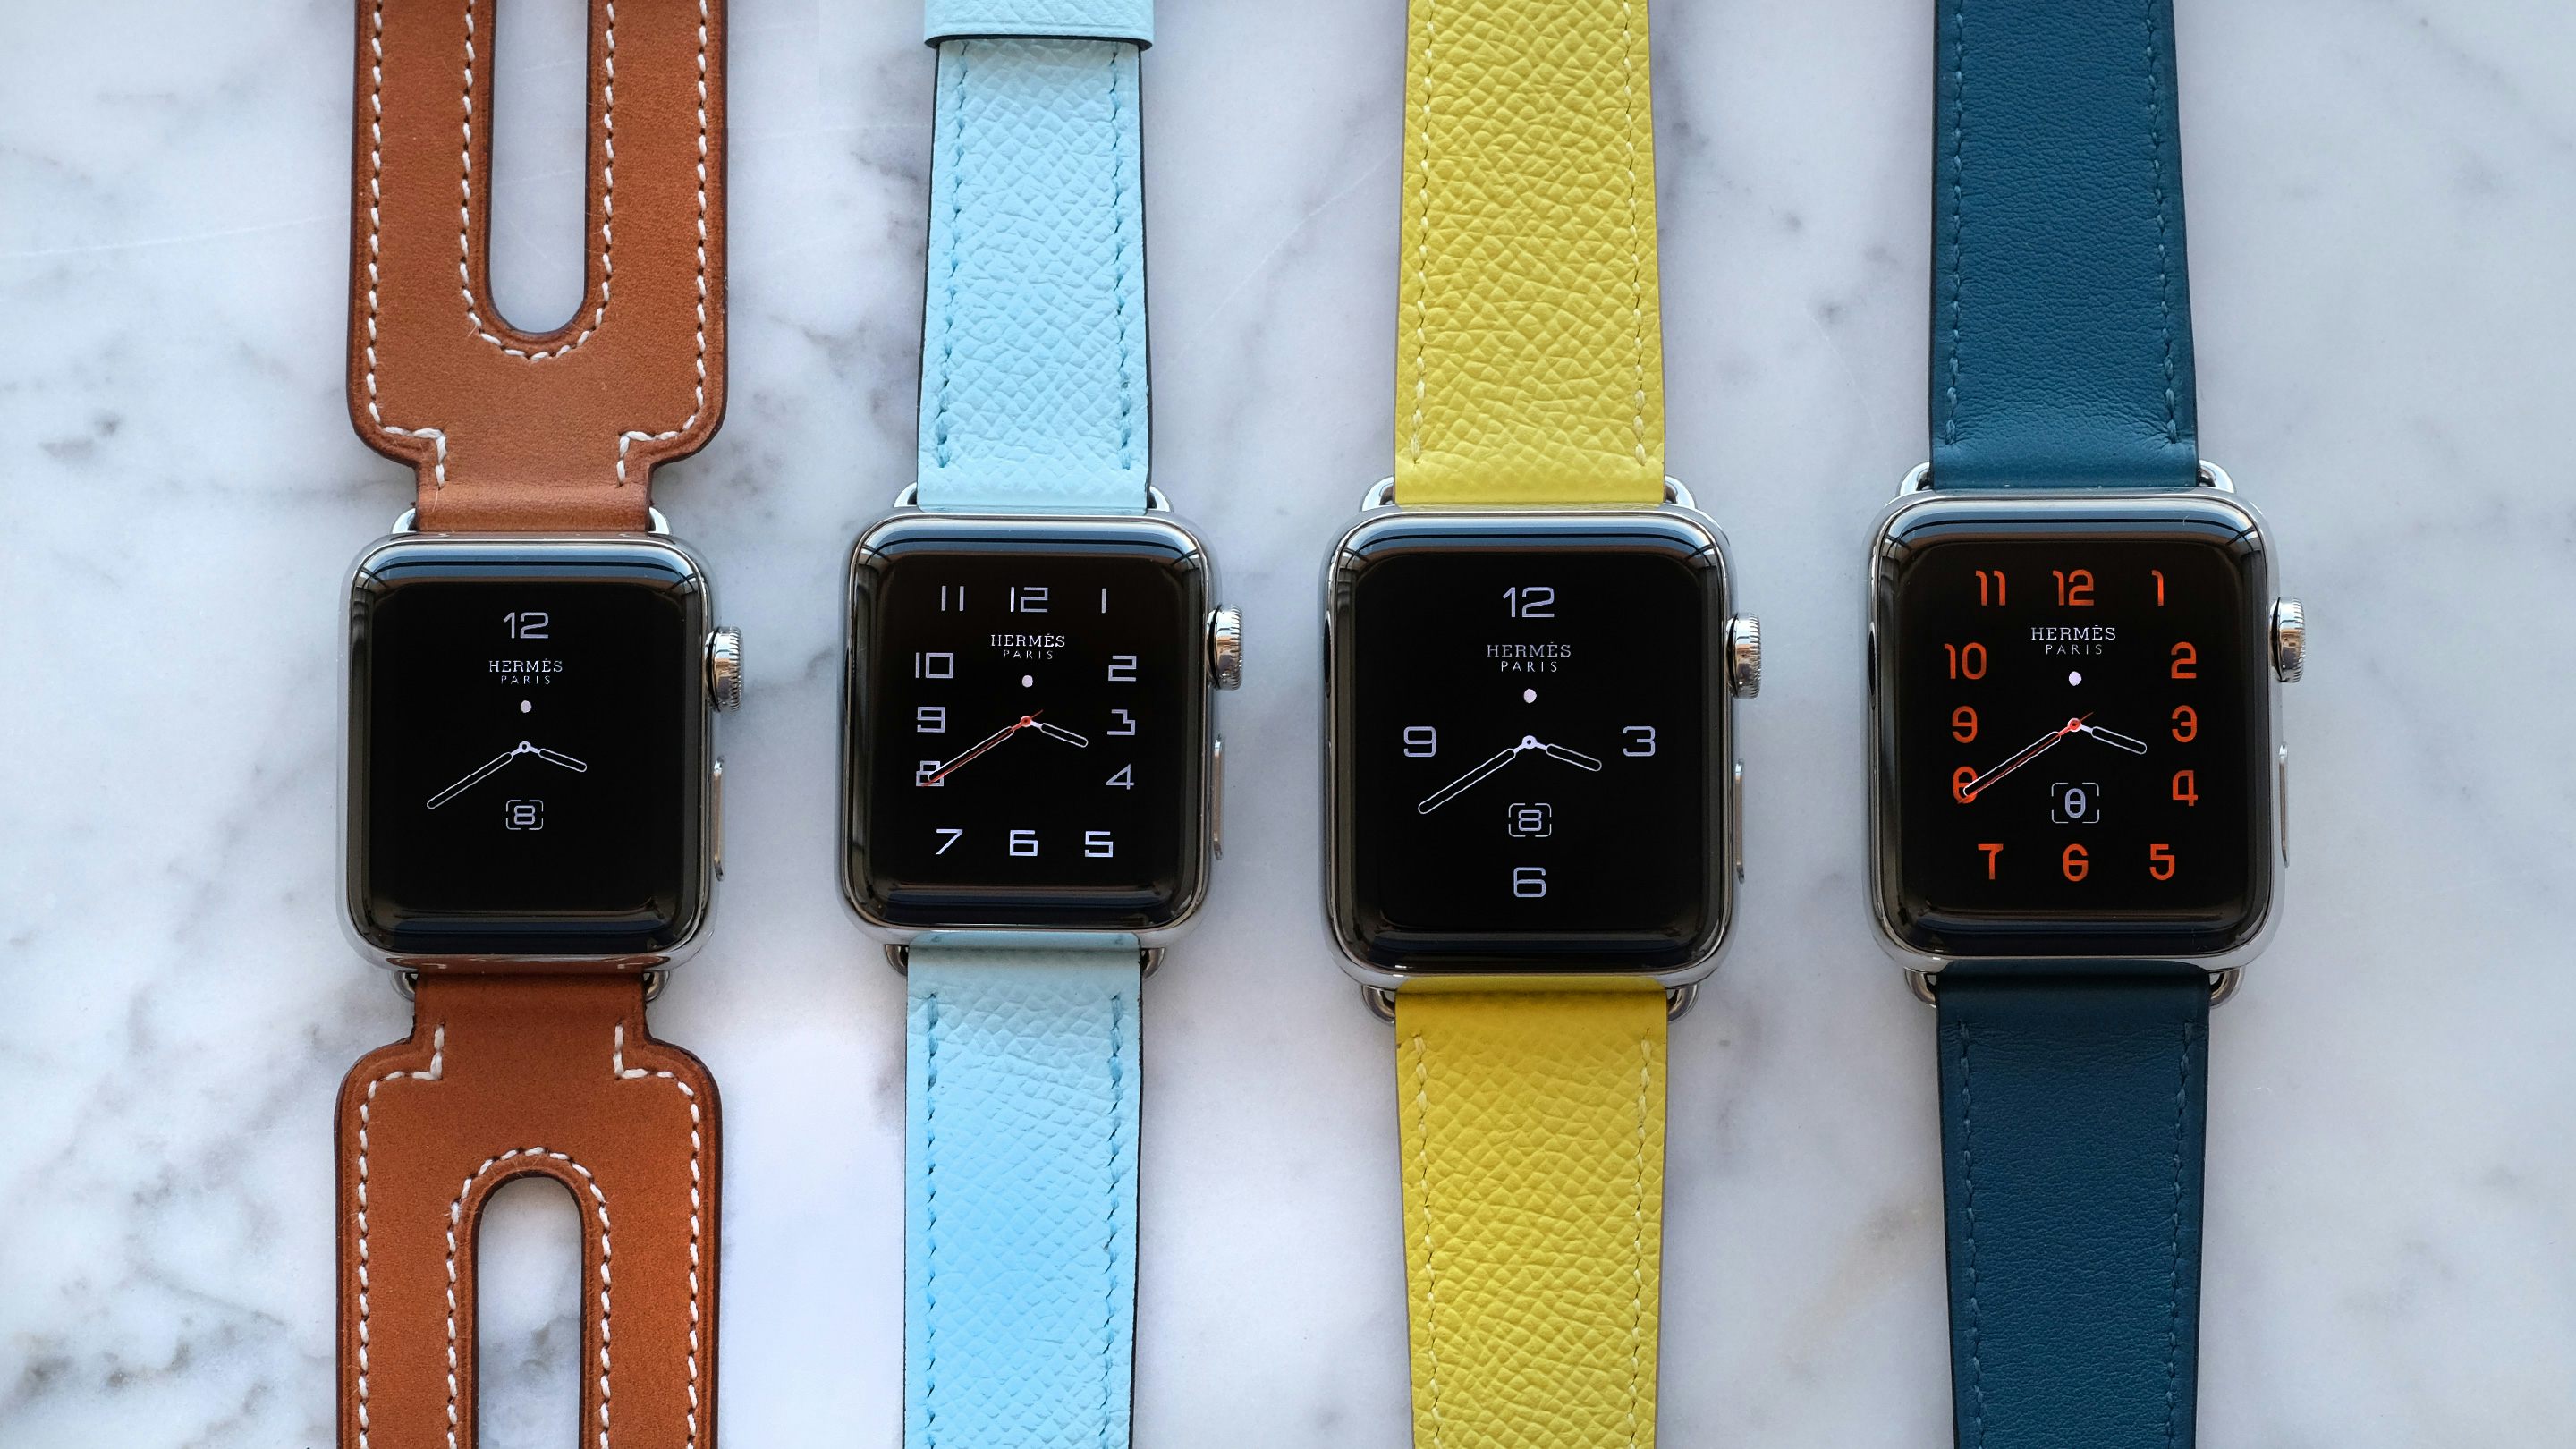 Hands on with the luxury Hermes Apple Watch Series 7